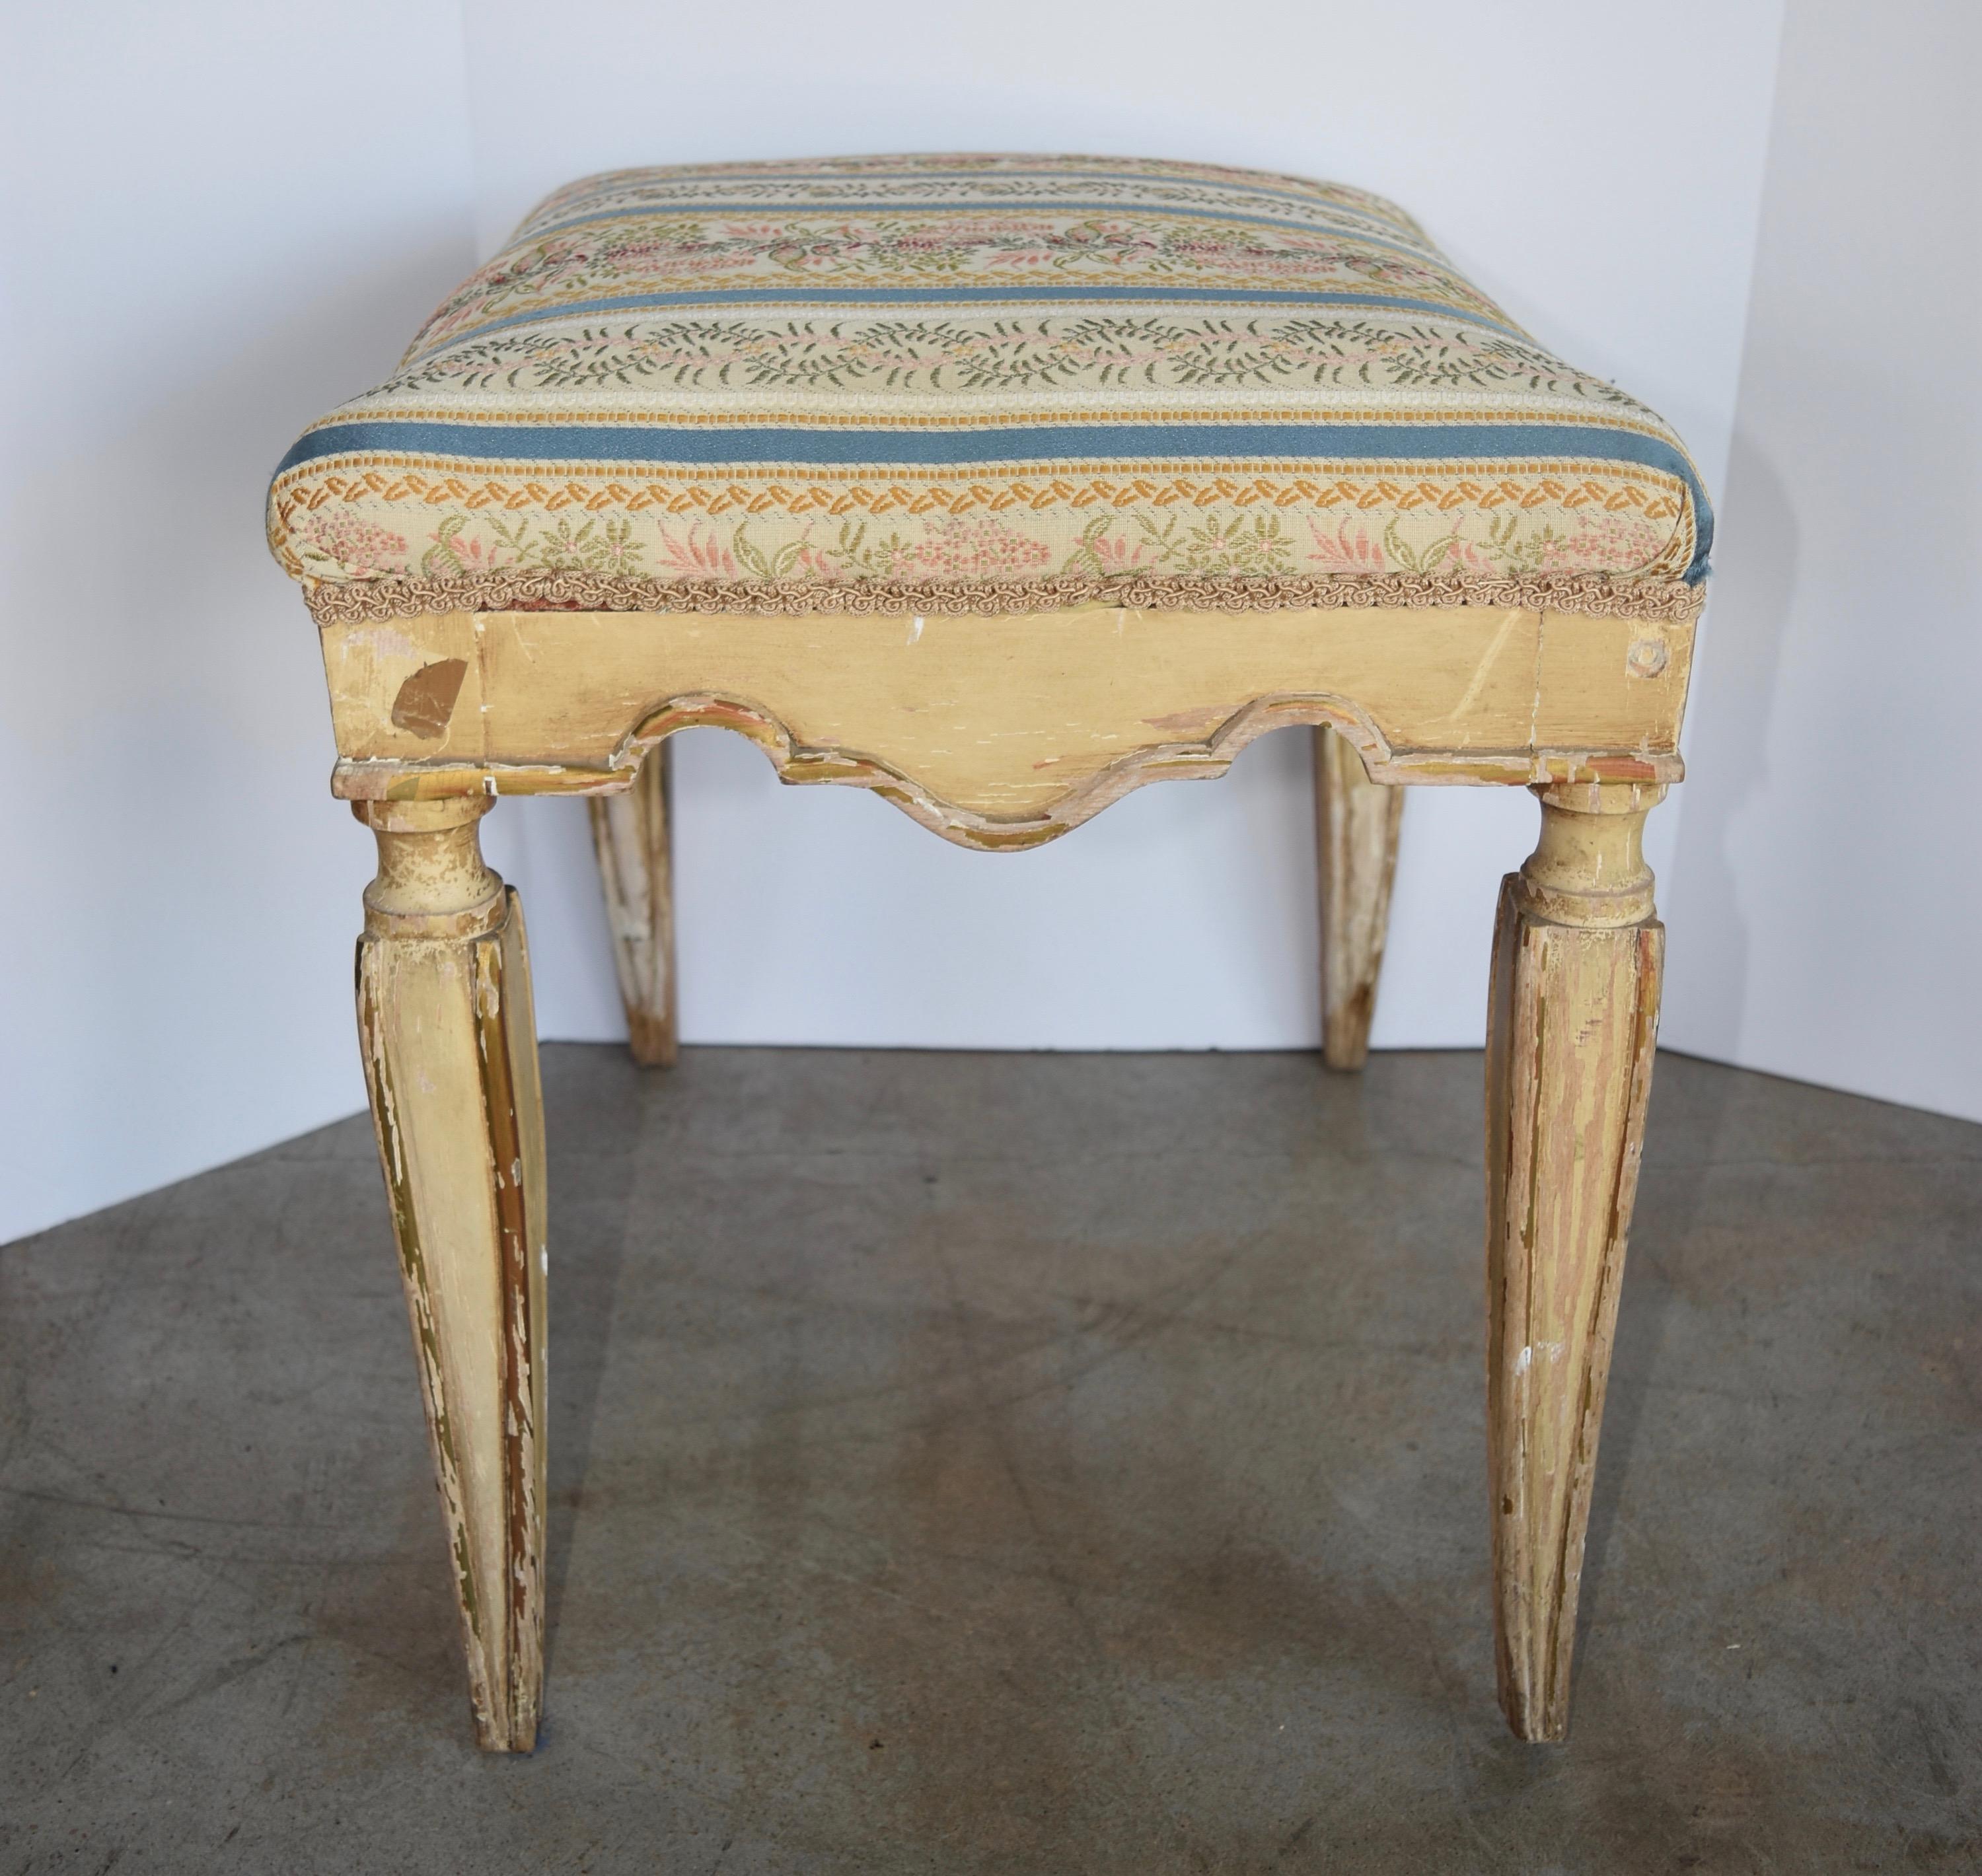 Romantic Pair of Late 18th Century Wooden Original Painted Italian Benches, Gold Touches